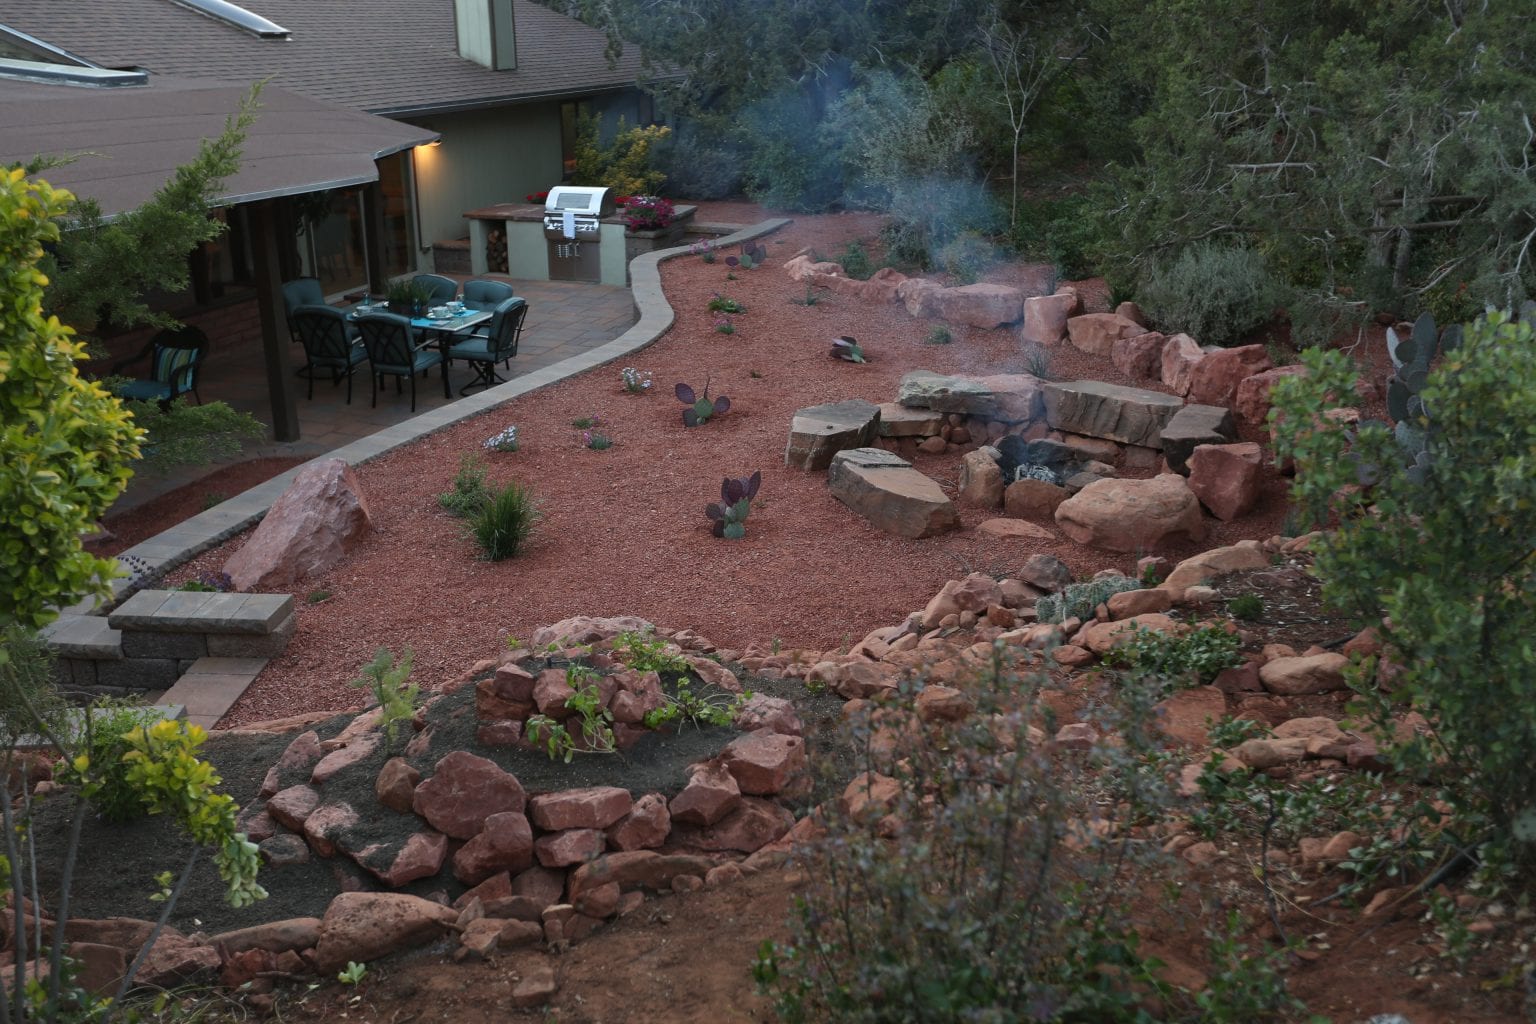 HGTV – Coming to West Sedona in 2 Days! Set Your DVR!!